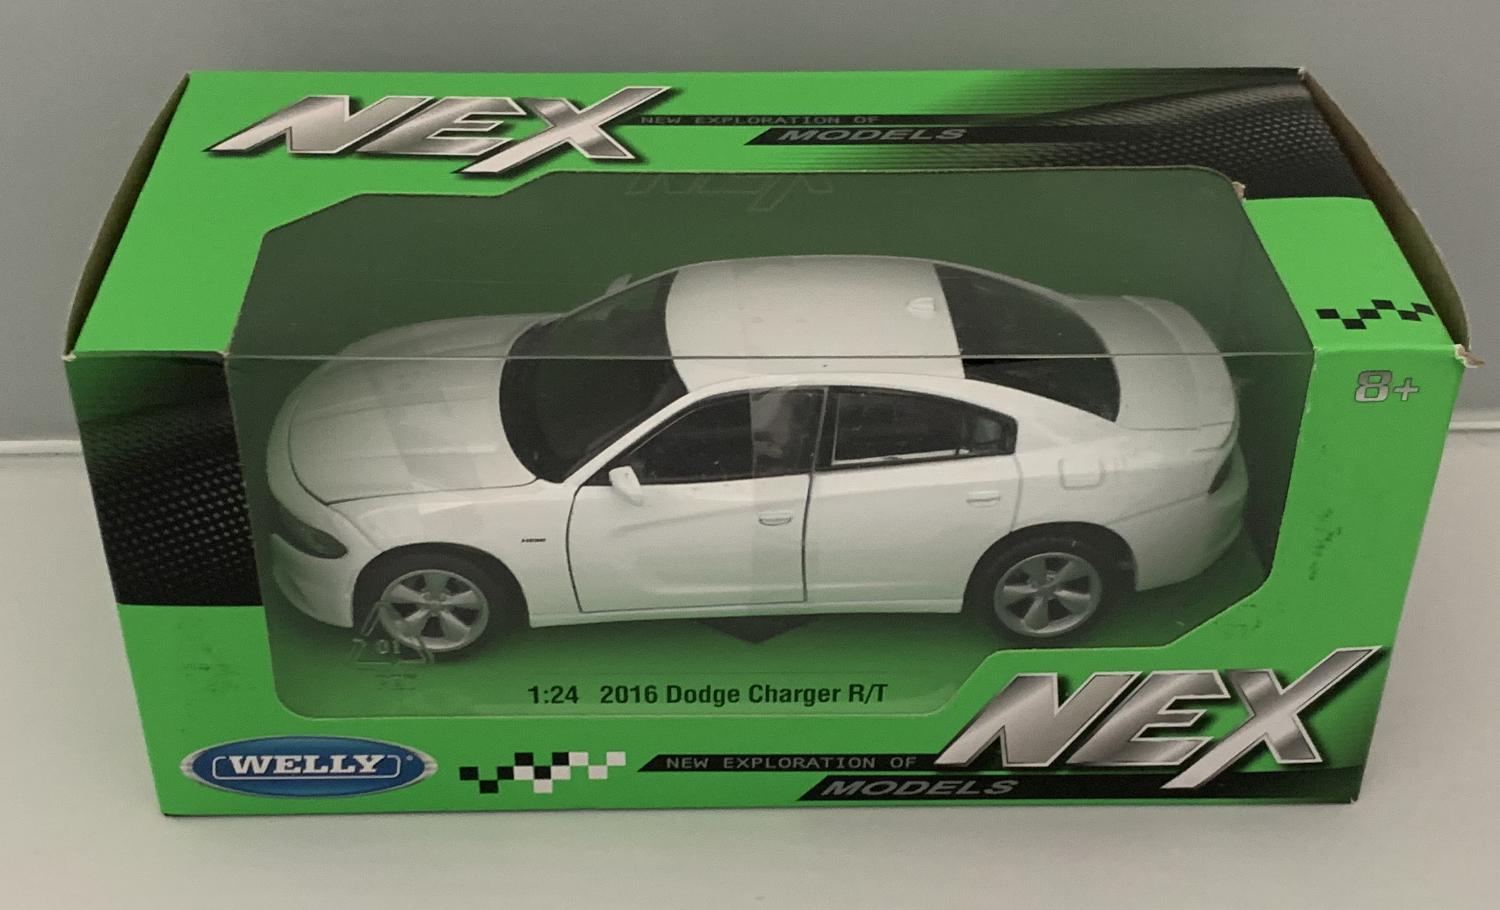 An excellent reproduction of the Dodge Charger R/T with high level of detail throughout, all authentically recreated. Model is presented in a window display box, the car is approx. 19 cm long and the presentation box is 23 cm long